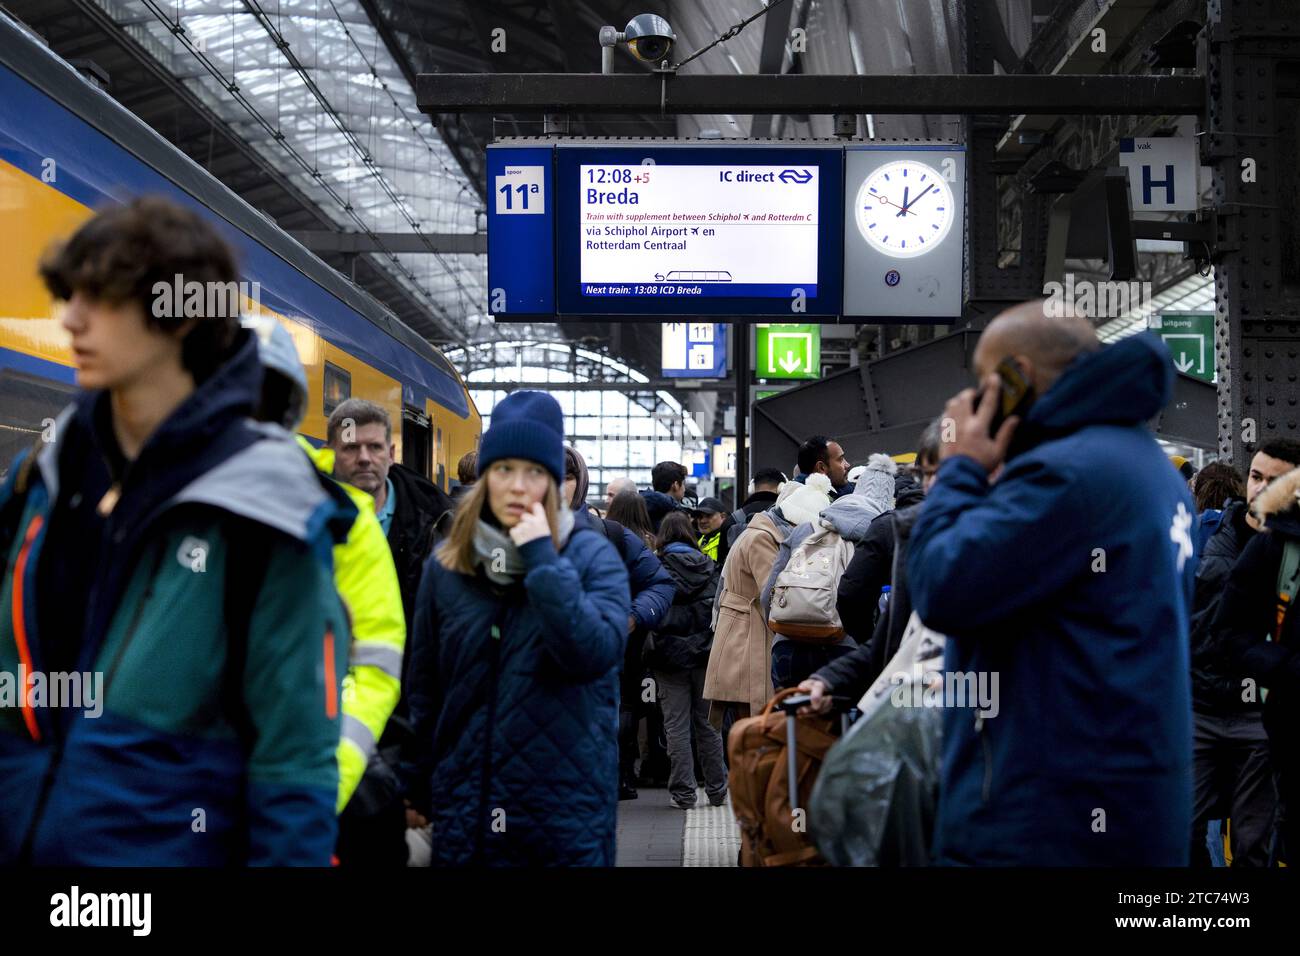 AMSTERDAM - Travelers at Amsterdam Central station. The new NS timetable has come into effect. For example, more intercity trains run between the major cities and the Intercity Direct between Amsterdam and Breda runs all day long. ANP RAMON VAN FLYMEN netherlands out - belgium out Stock Photo